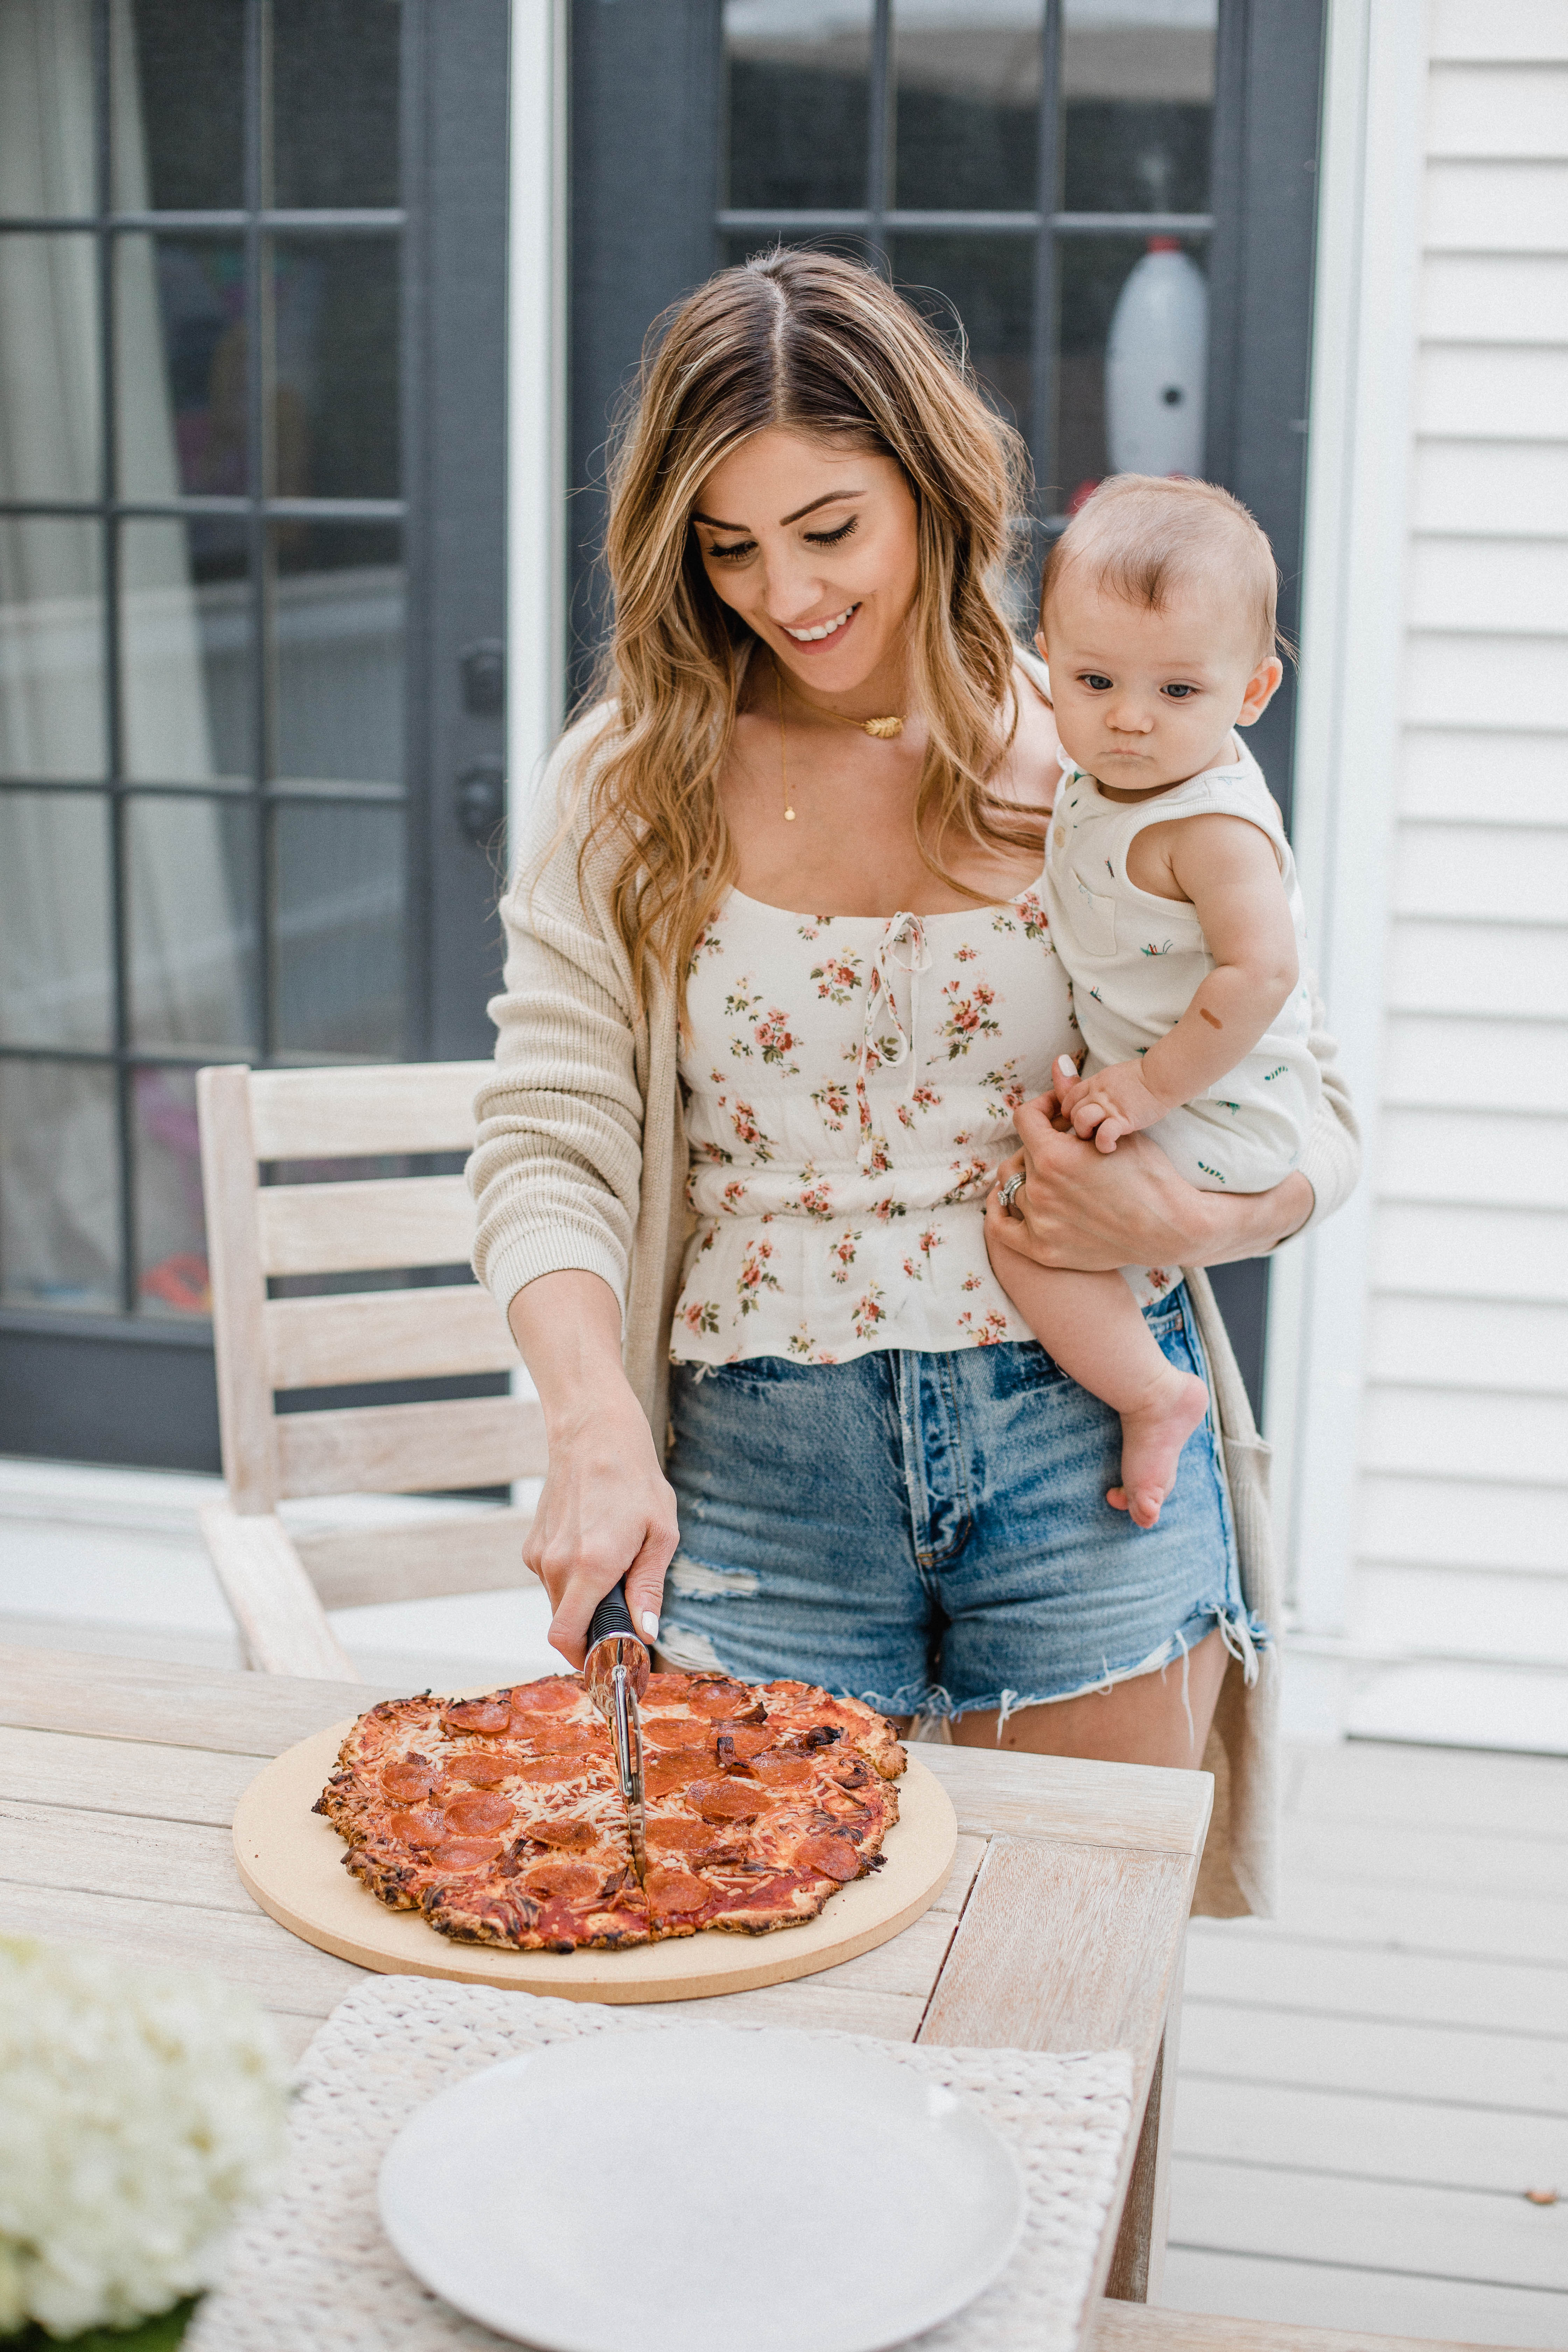 Connecticut life and style blogger Lauren McBride shares Easy Gluten Free Grilled Pizza and one item that makes grilling pizza perfect every time.